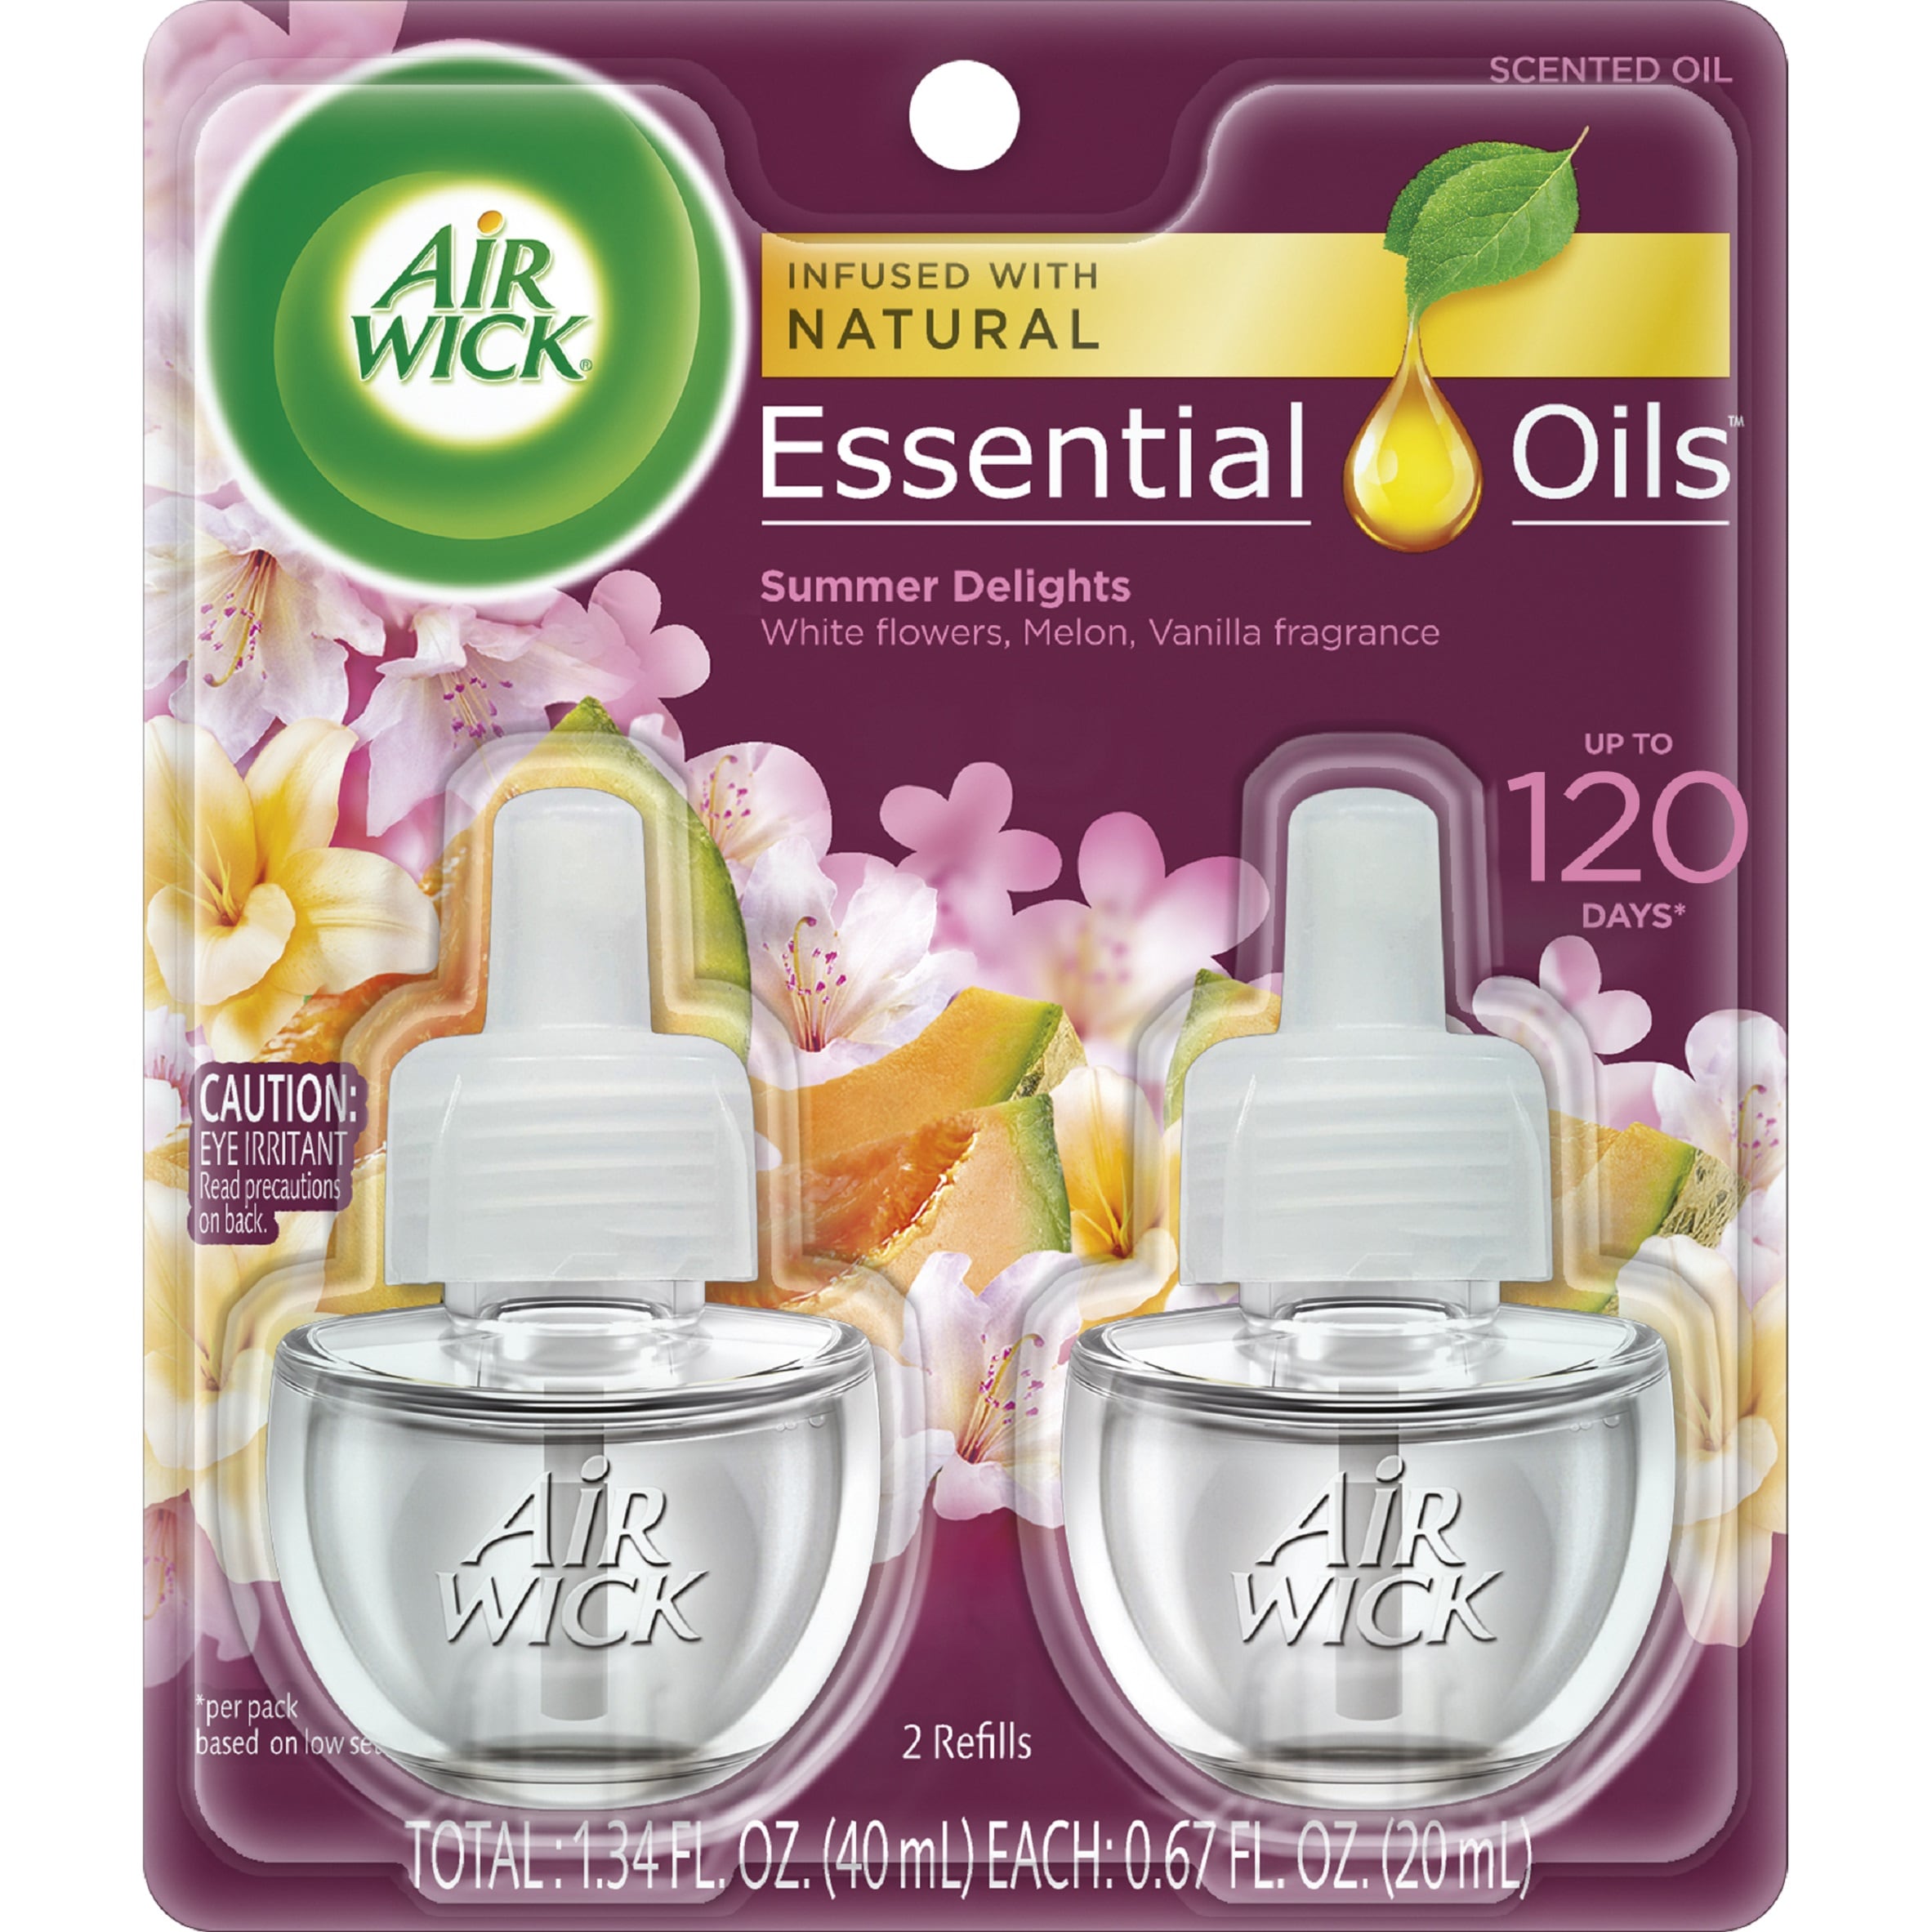 Shop Cherry Blossom Plug in Refill- Fits Air Wick and More - Scent Fill